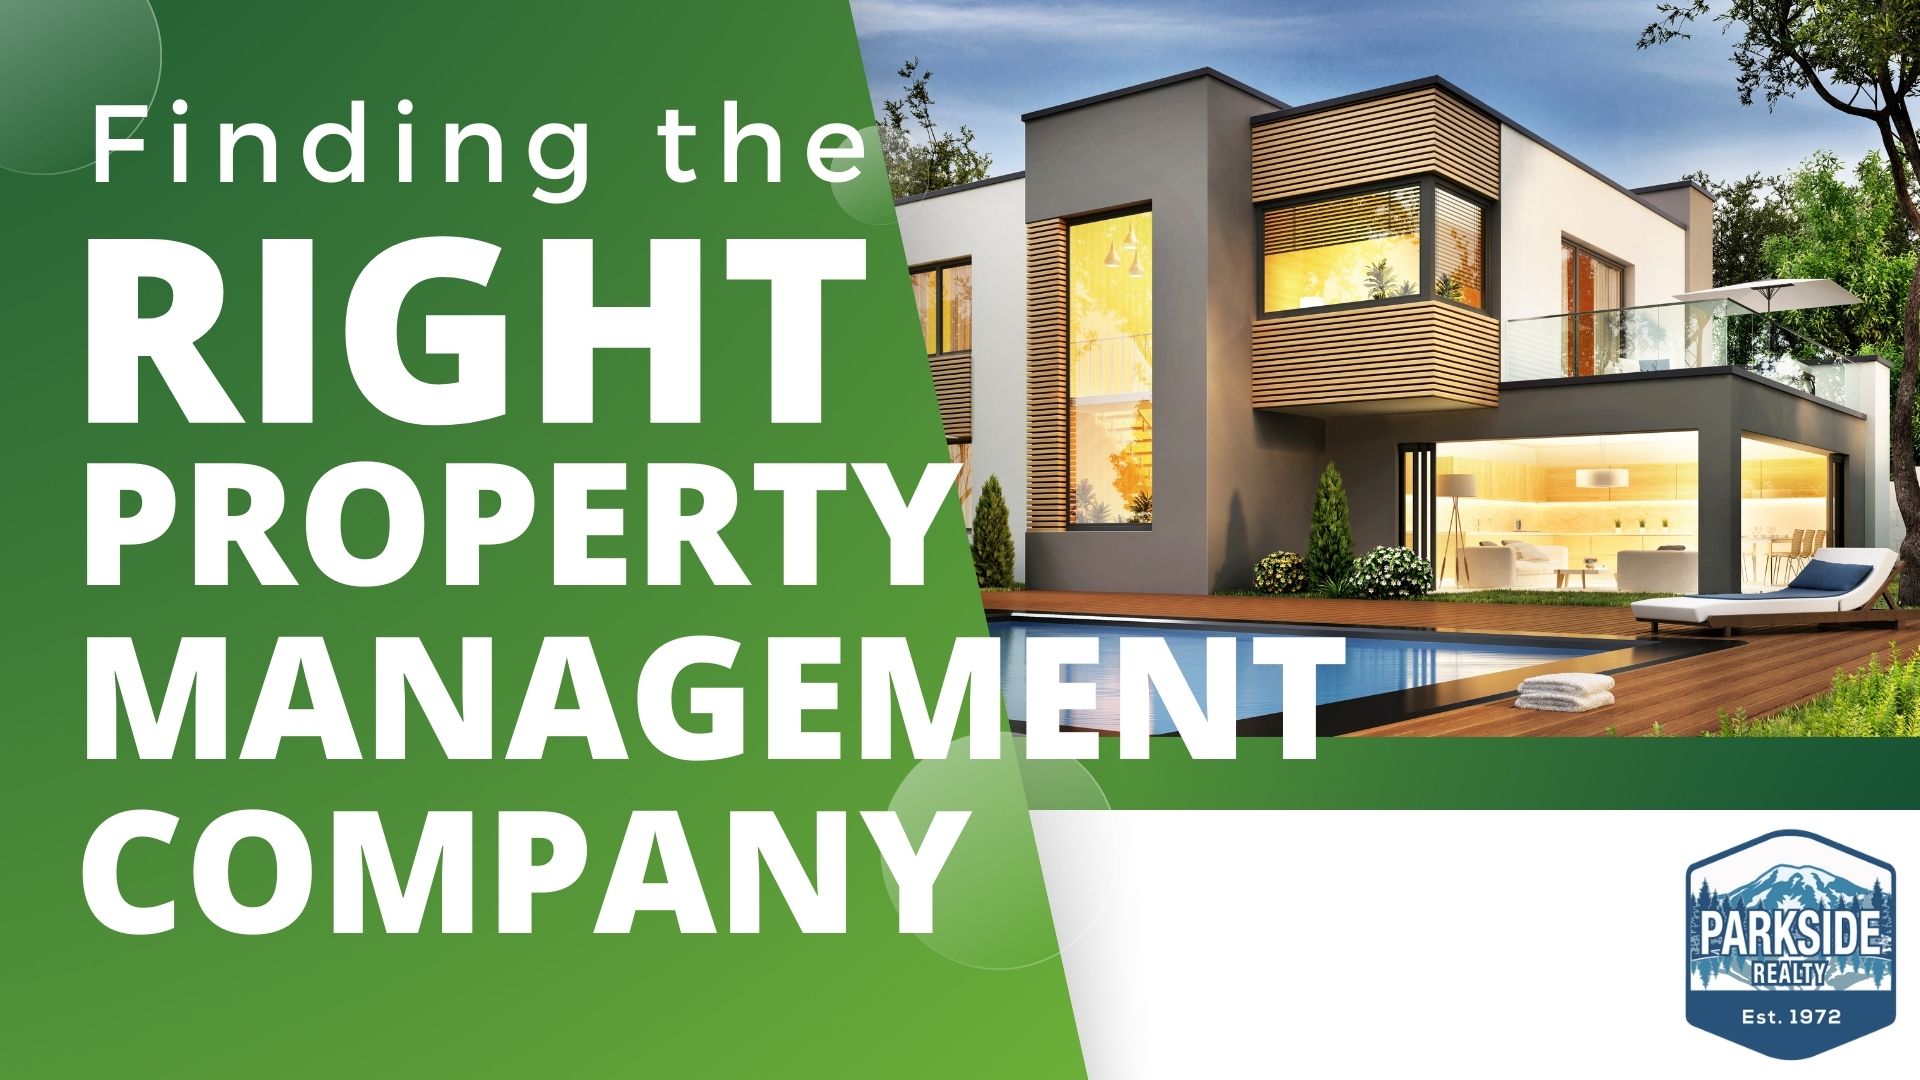 Finding the Right Property Management Company